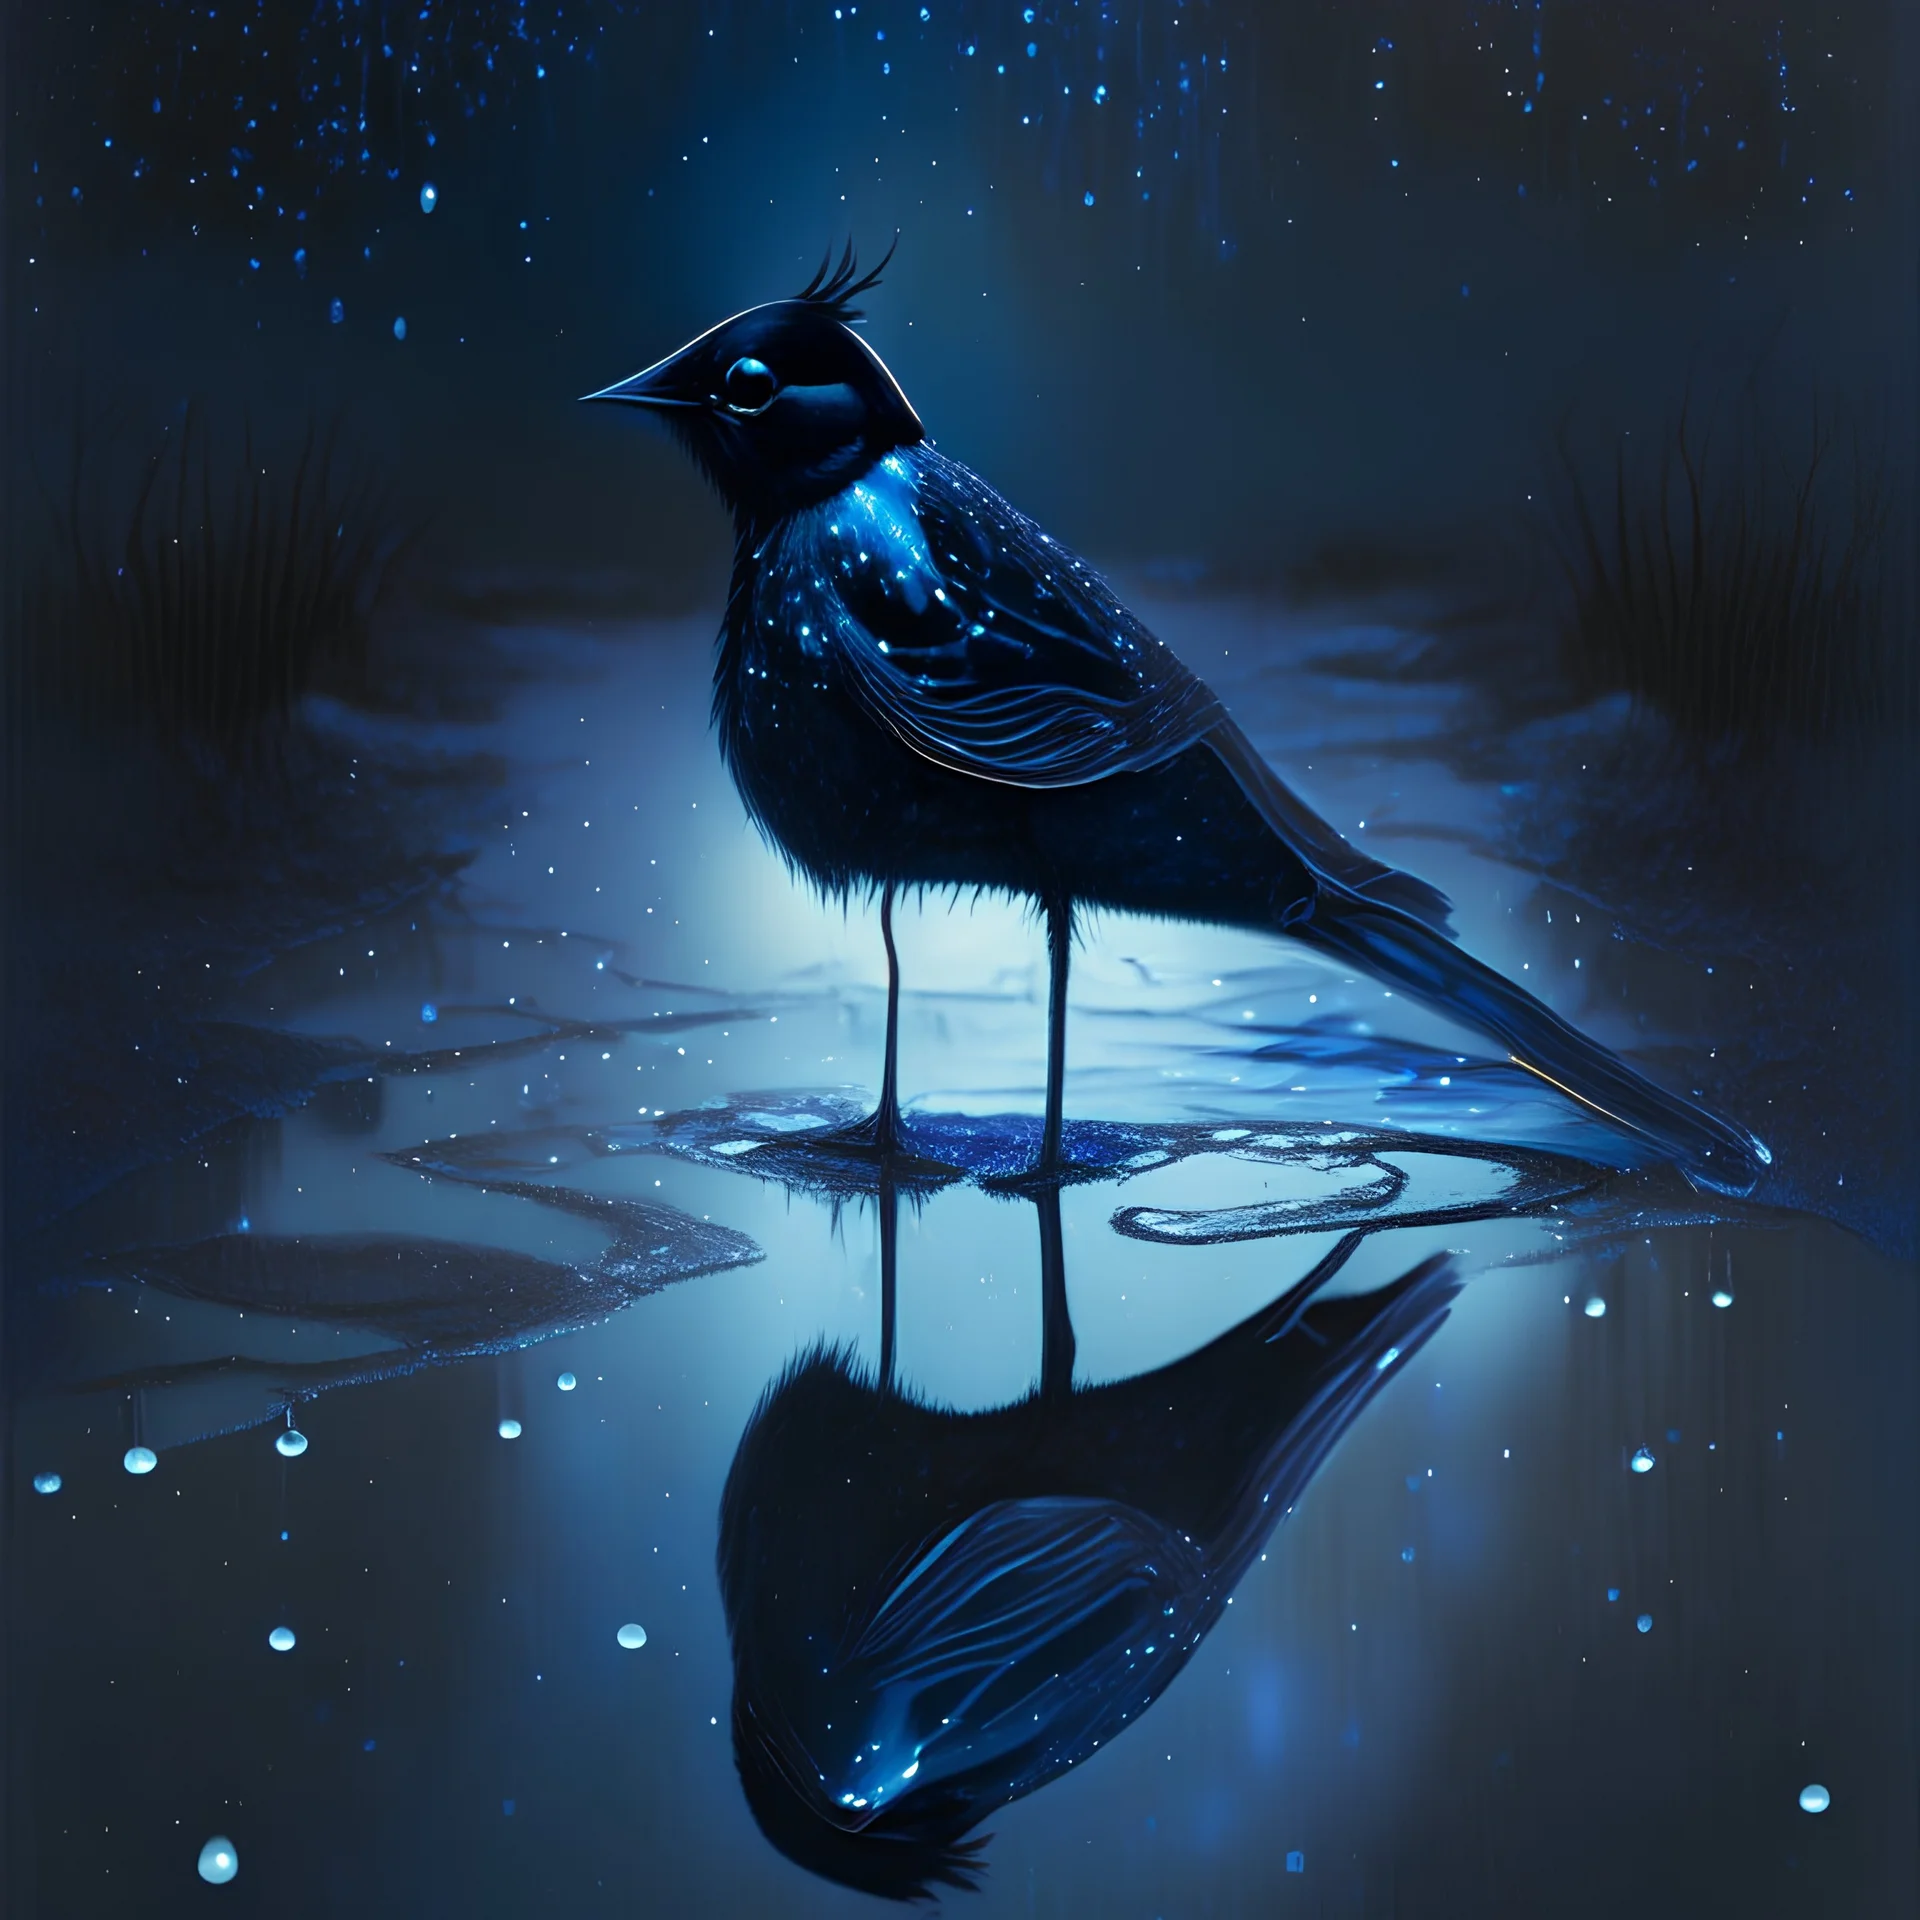 a black wagtail bird with long piek and long legs standing on puddle, reflection, dark blue glowing light, fantasy, magic, dark, stars, sparkle